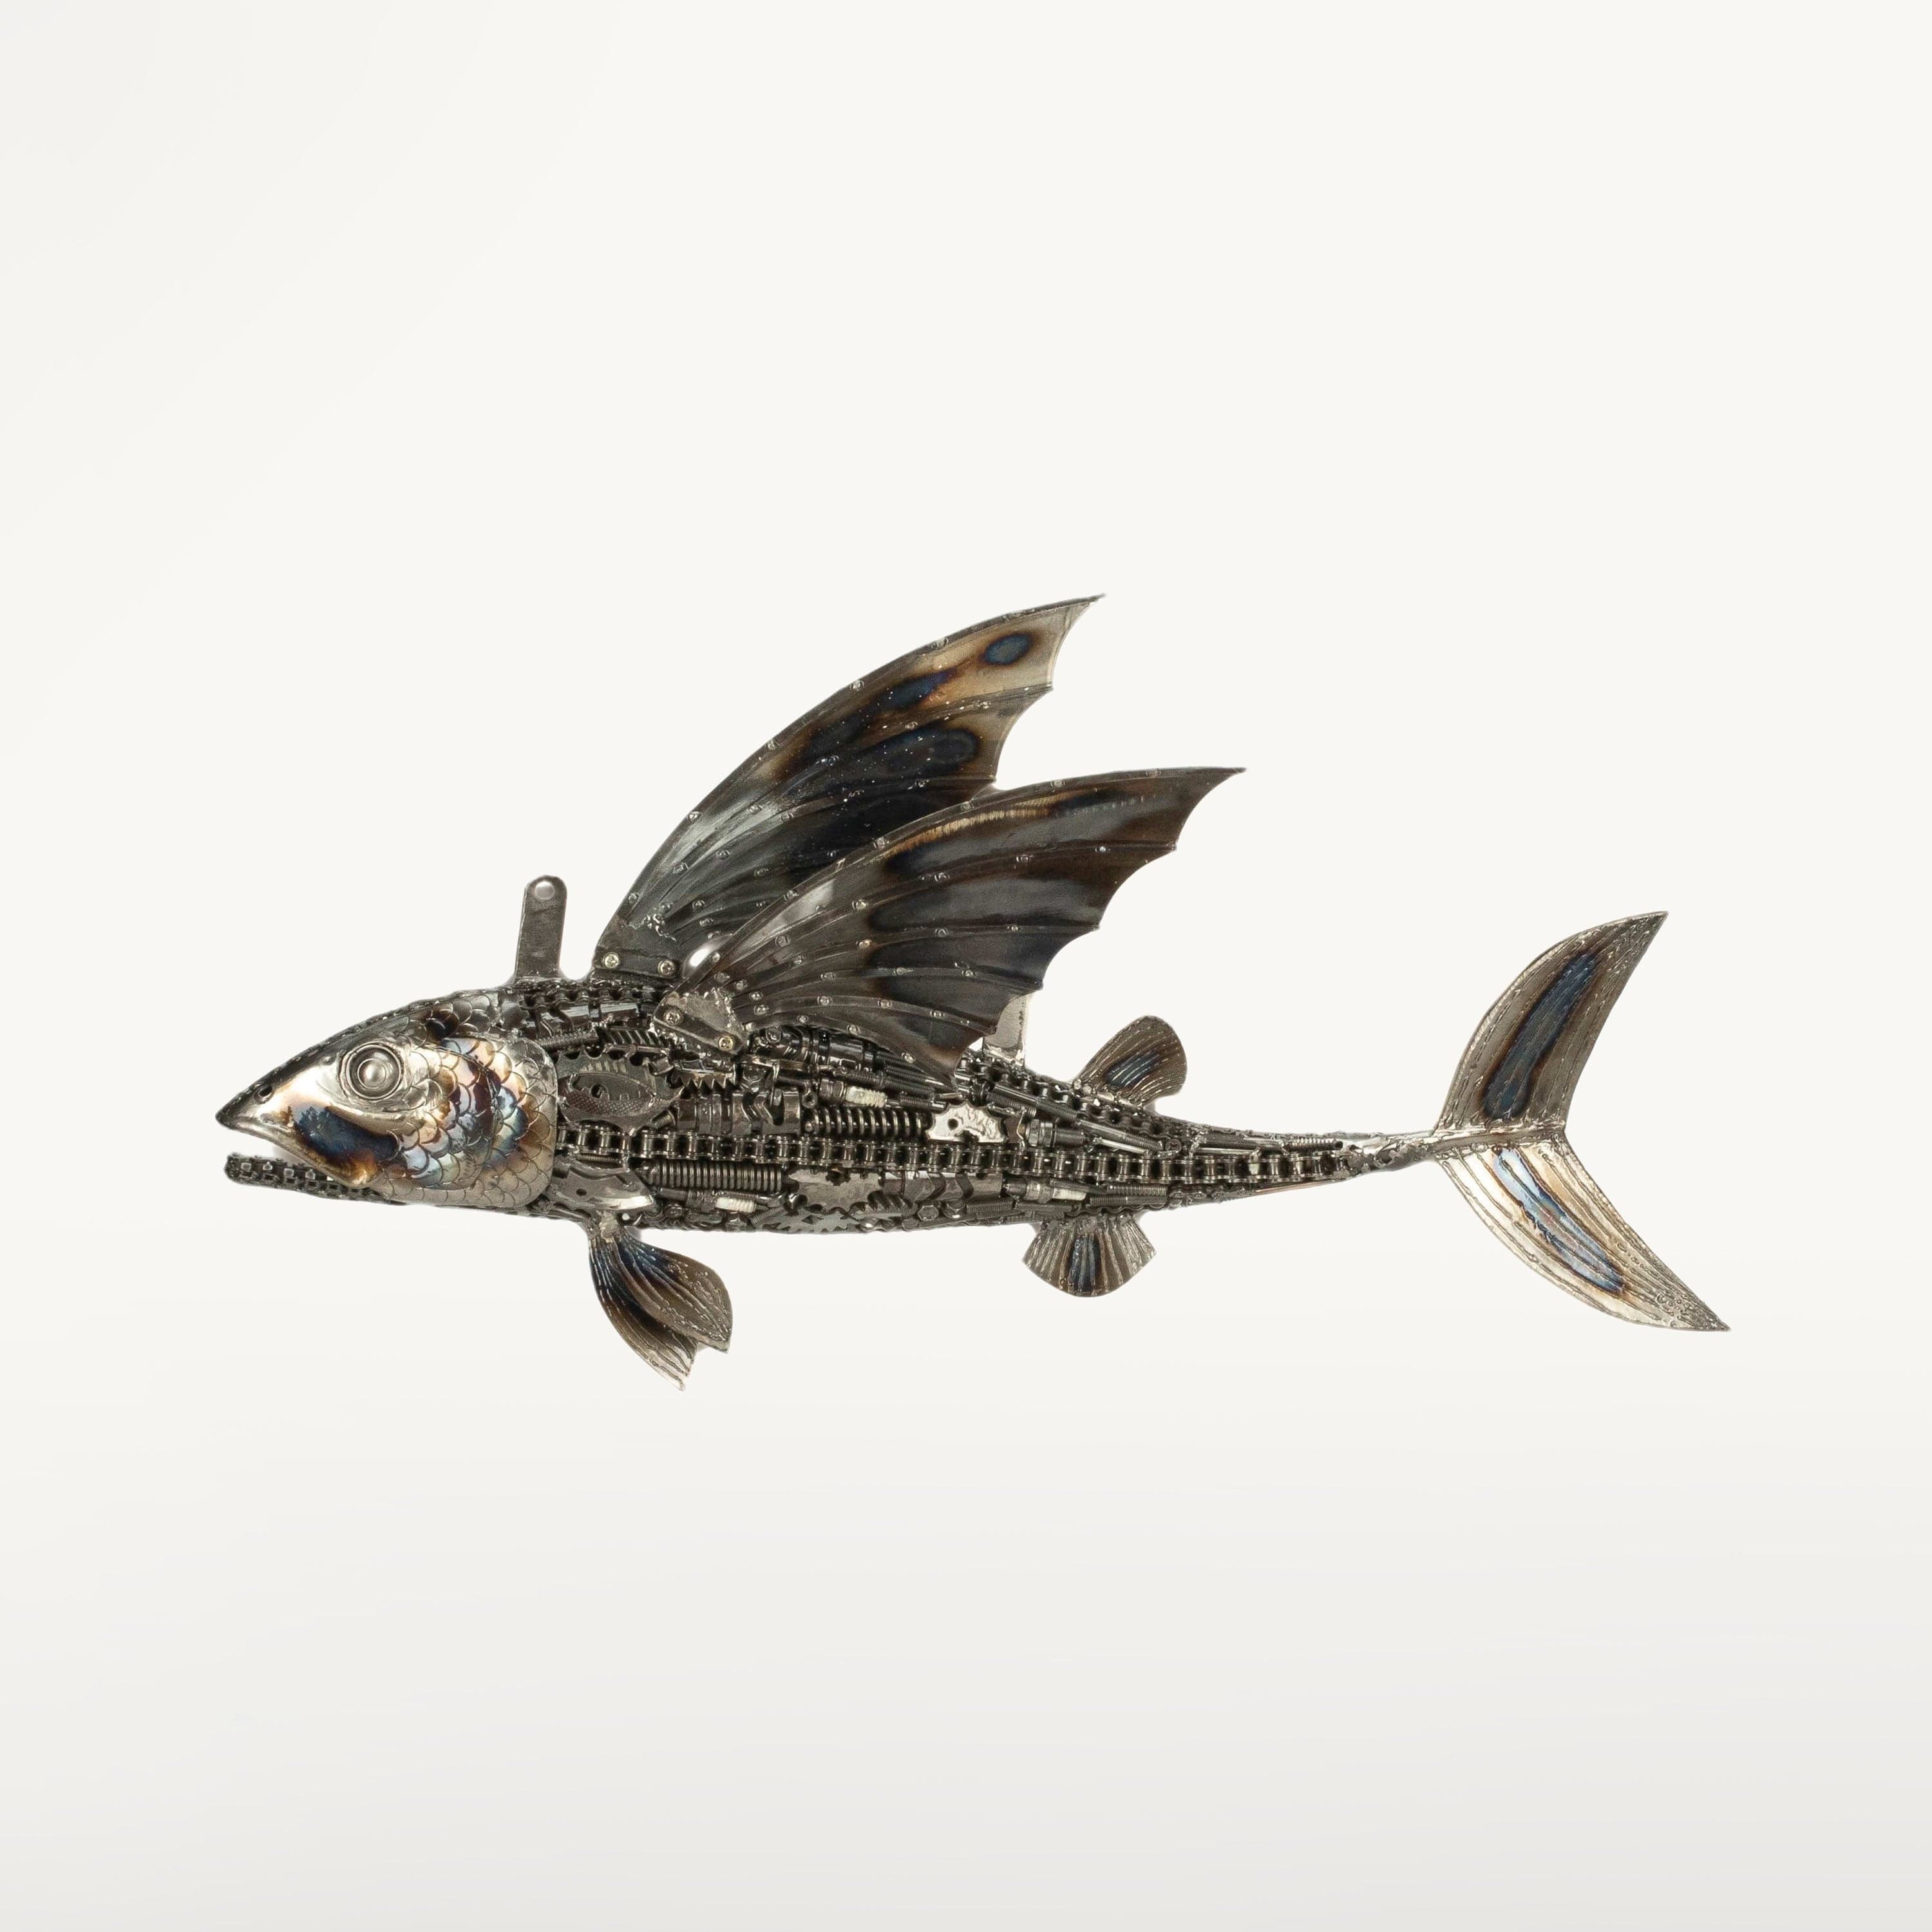 KALIFANO Recycled Metal Art 35" Flying Fish (Right) Recycled Metal Art Sculpture RMS-FFR88x55-PK